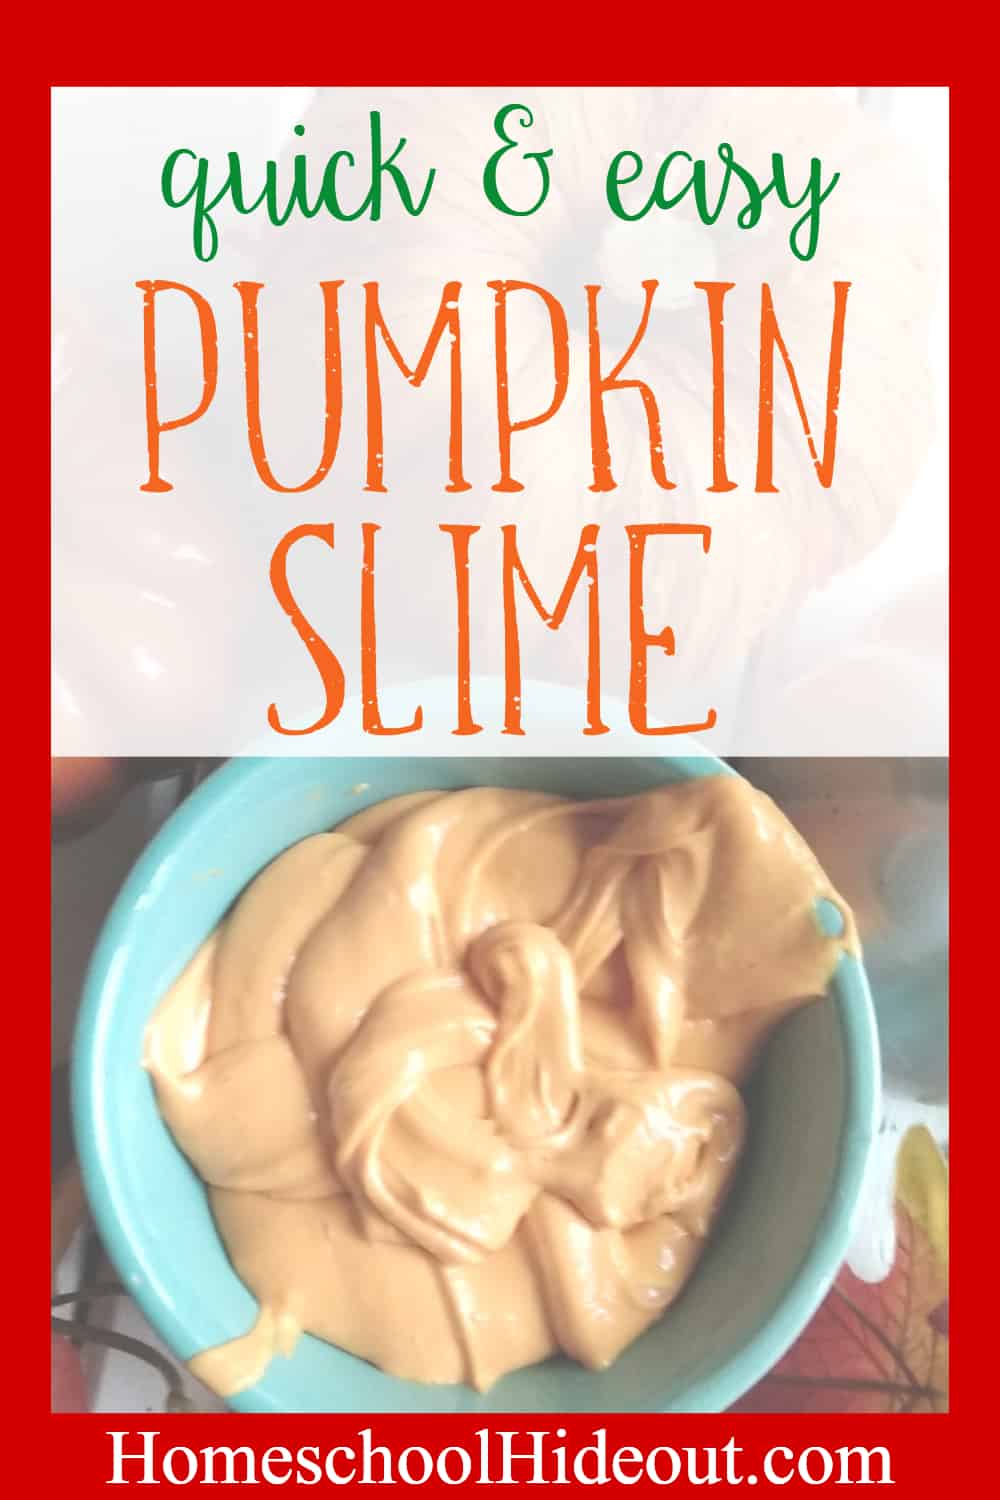 Looking for a fun activity that packs a lot of punch? Your kiddos will squeal in delight with this super simple pumpkin slime! #slime #handsonlearning #fall #pumpkinspice #diyslimerecipe #preschool #activities #handson #kids